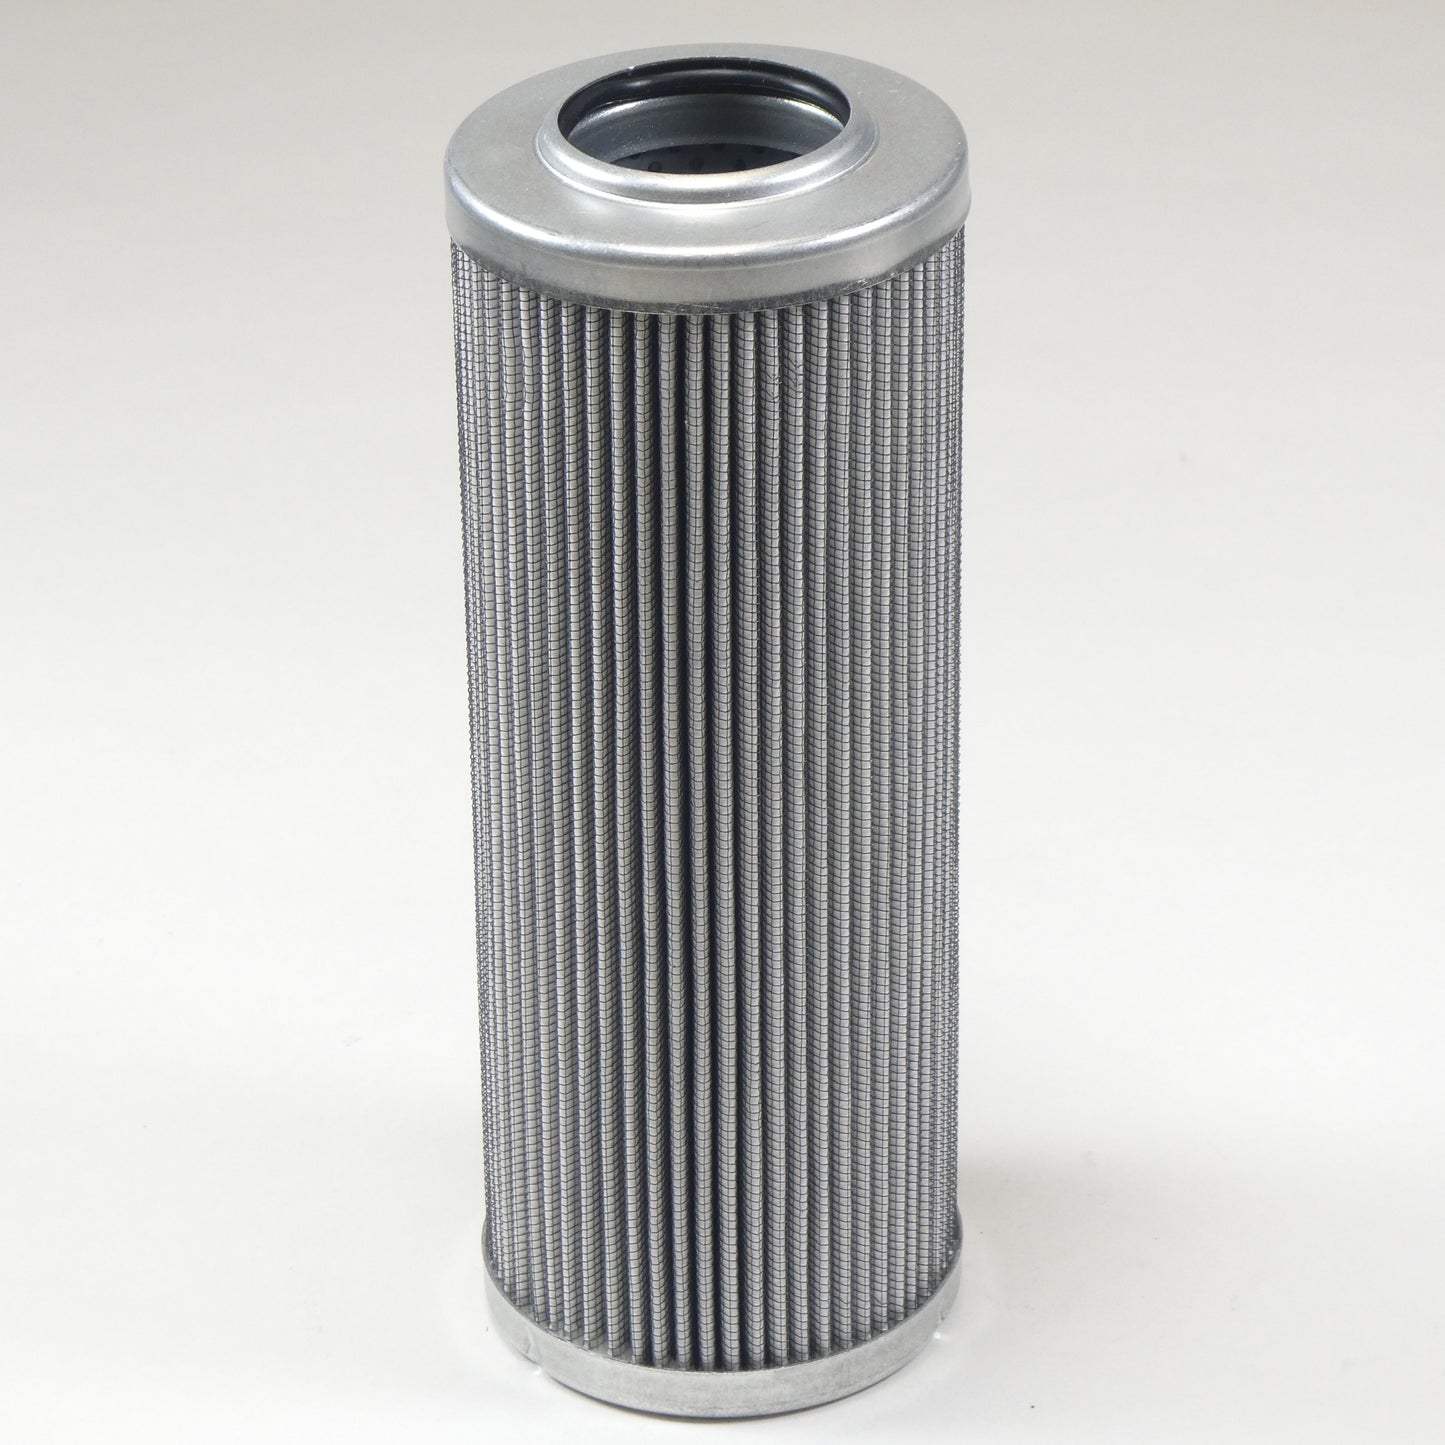 Hydrafil Replacement Filter Element for Hilco 3830-14-012-C